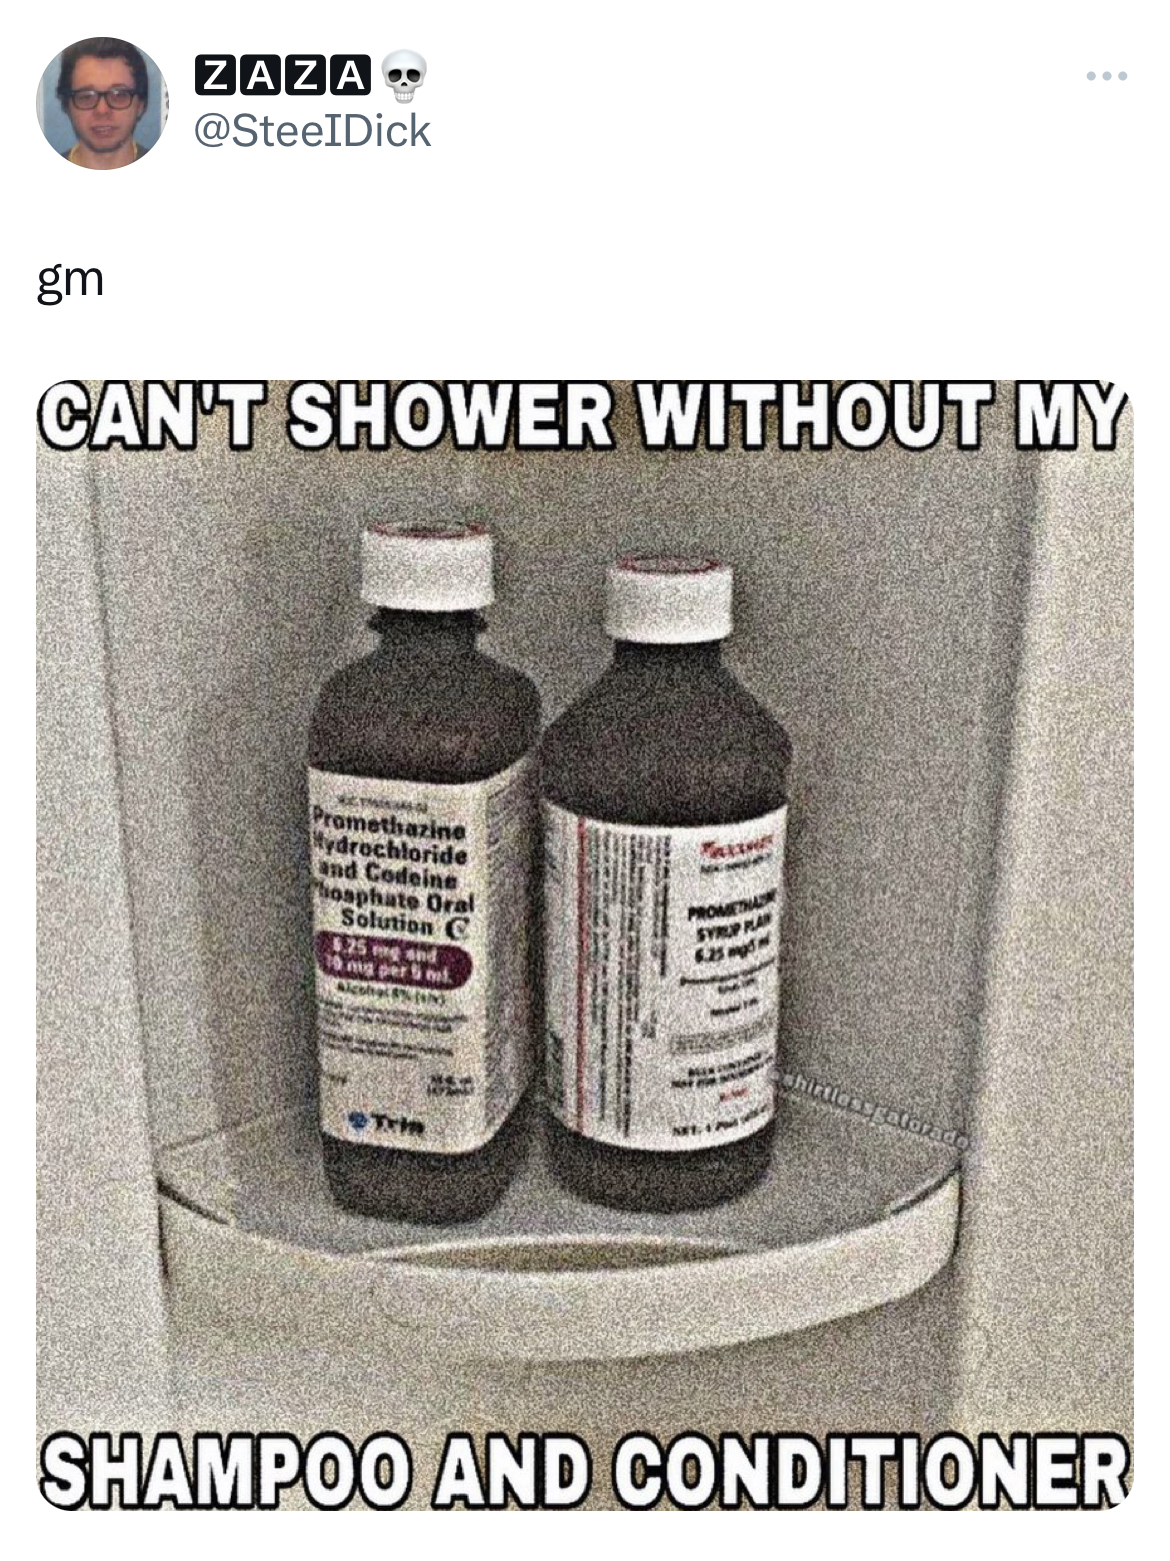 Unhinged Tweets - gm Zaza. Can'T Shower Without My Prometharine ydrochloride and Codeine sphate Oral Solution C 1864 par Trin Sent Shampoo And Conditioner